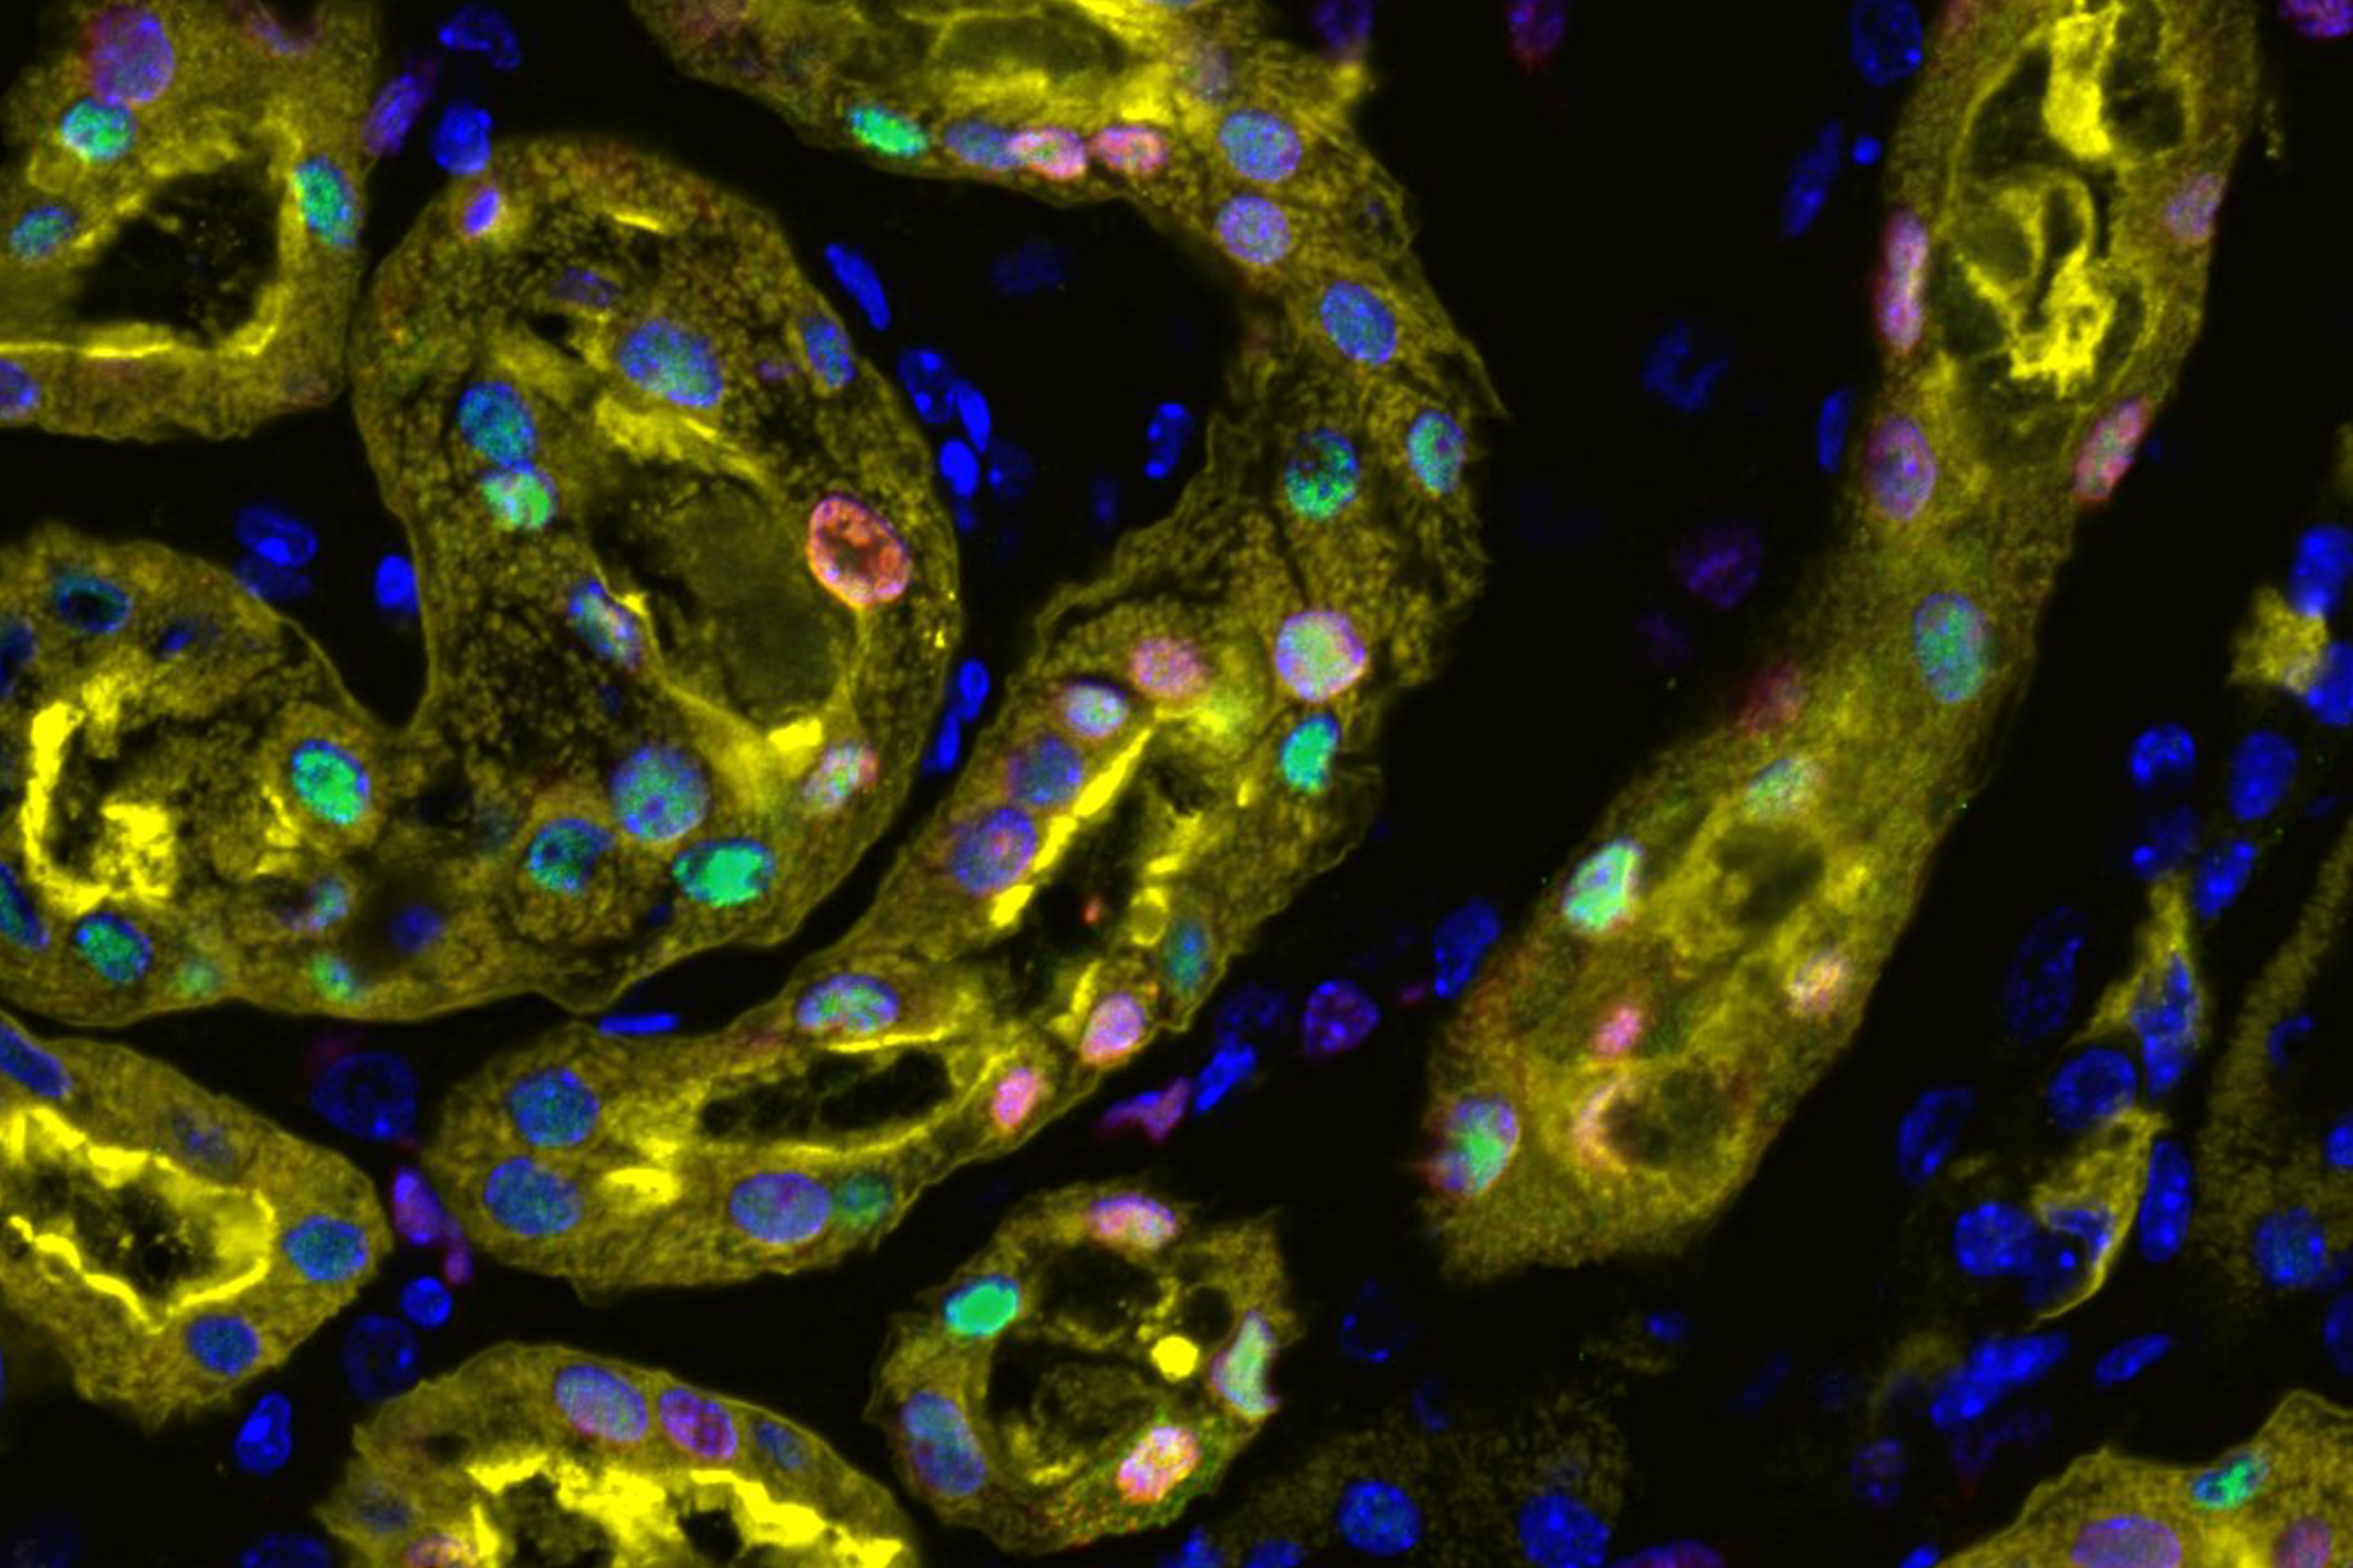 Activation of Sox9 (green) in nuclei (blue) of cellular lining (yellow) following acute nephron injury. Surviving SOX9+ cells proliferate (red) to repair the damaged nephron, restoring kidney function. 